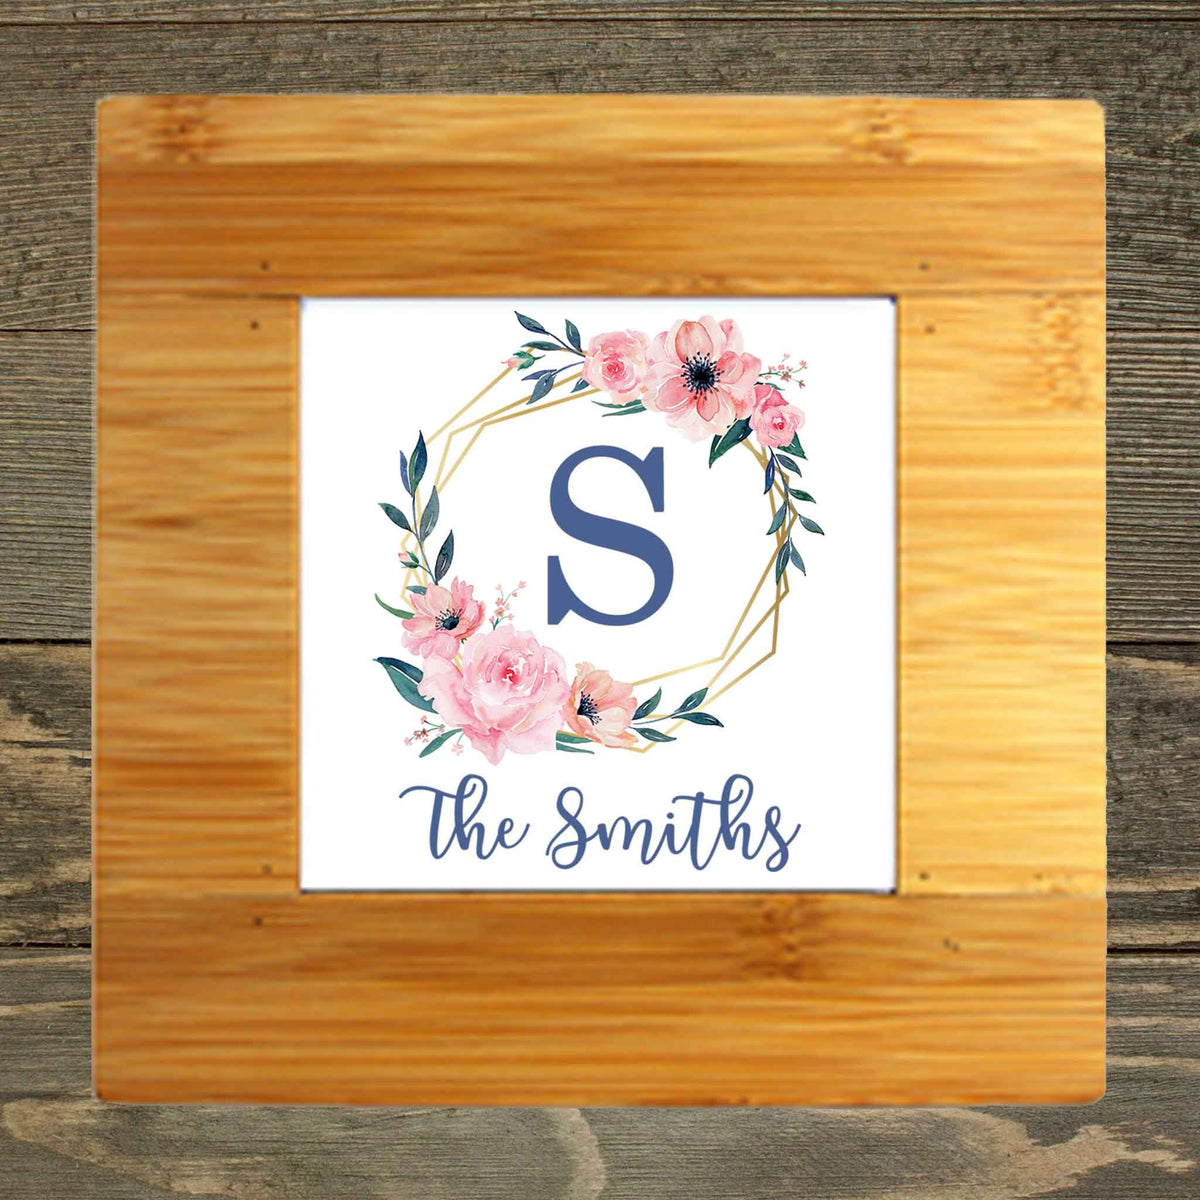 Personalized Iron Trivet | Custom Kitchen Gifts | Spring Watercolor